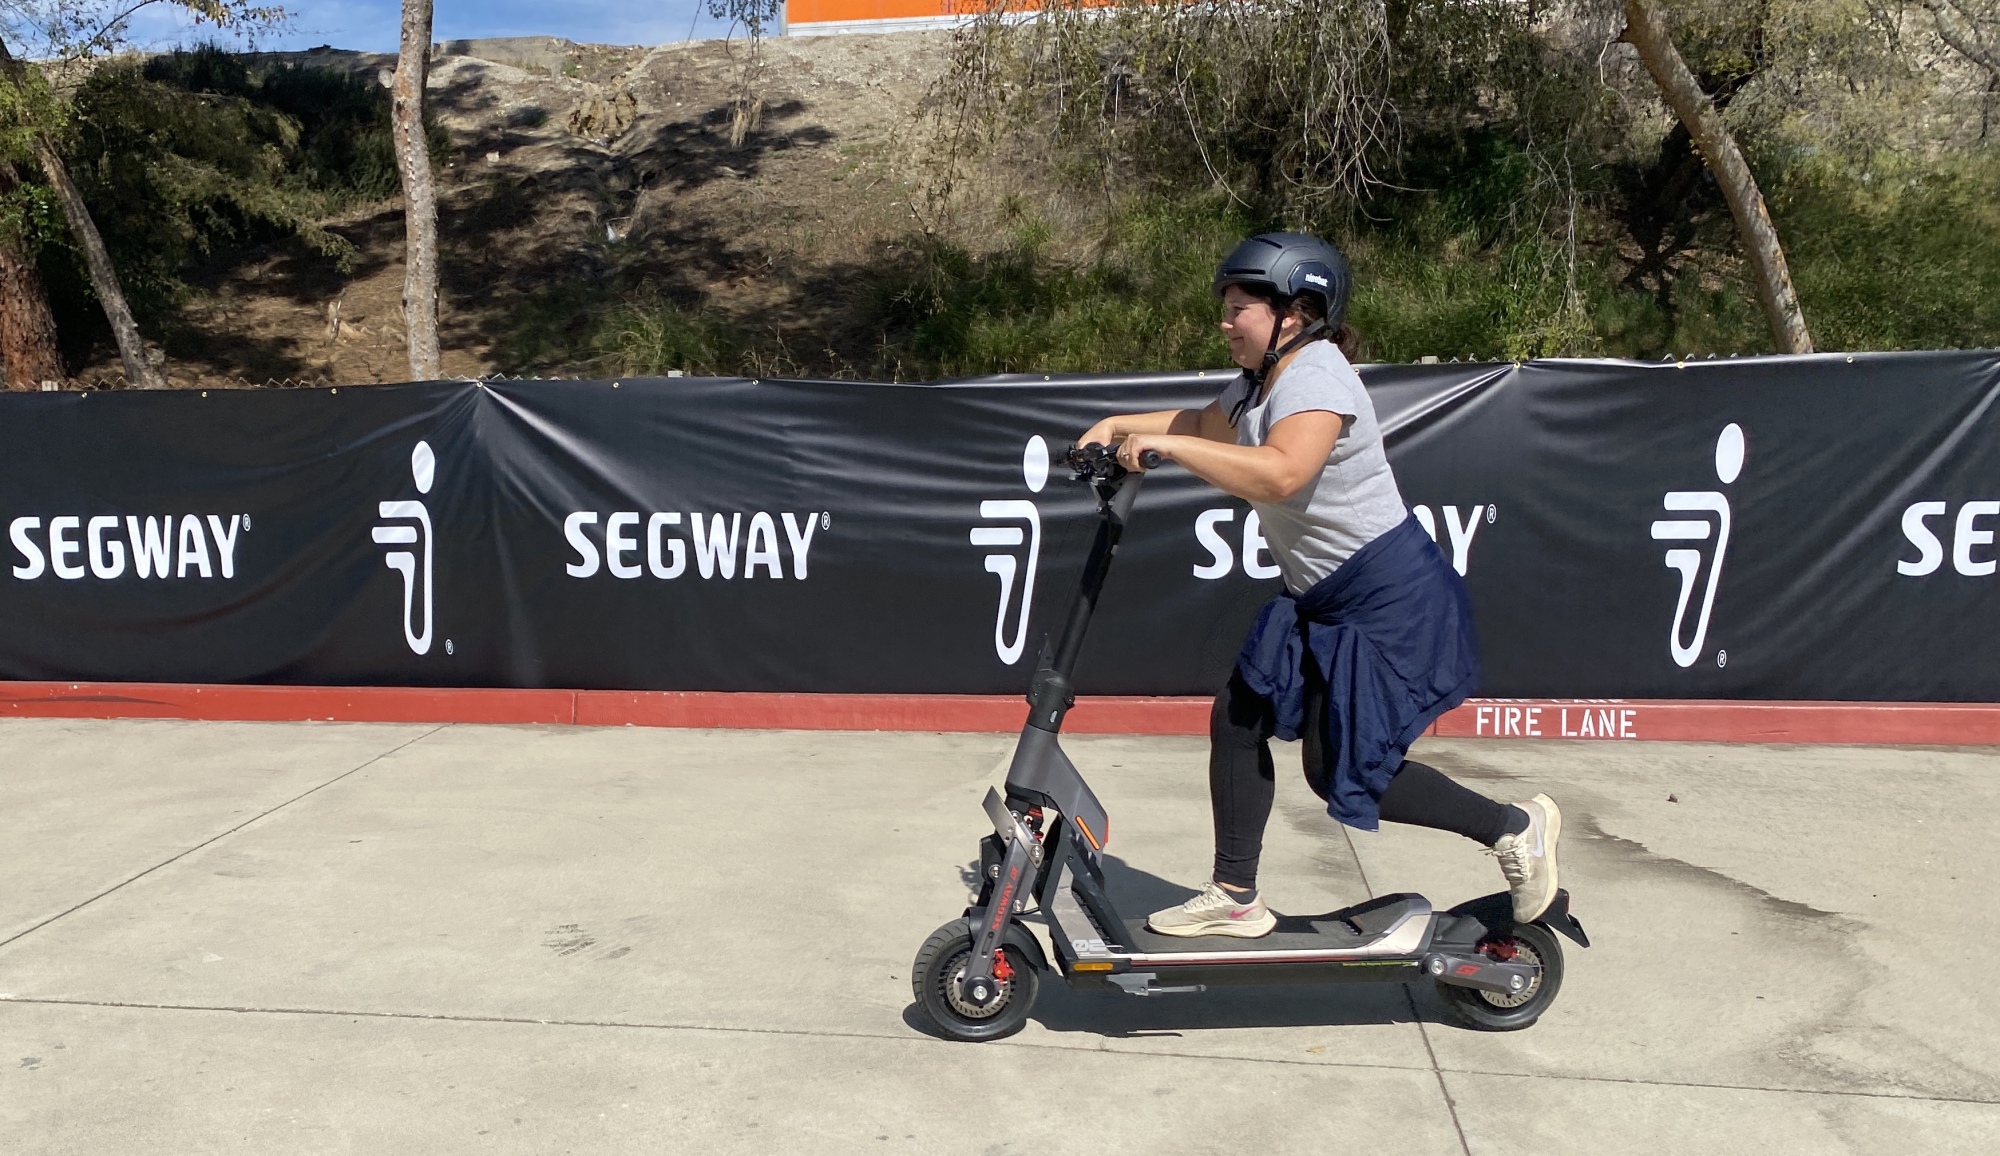 Mashable reporter riding an e-scooter in front of a Segway sign.